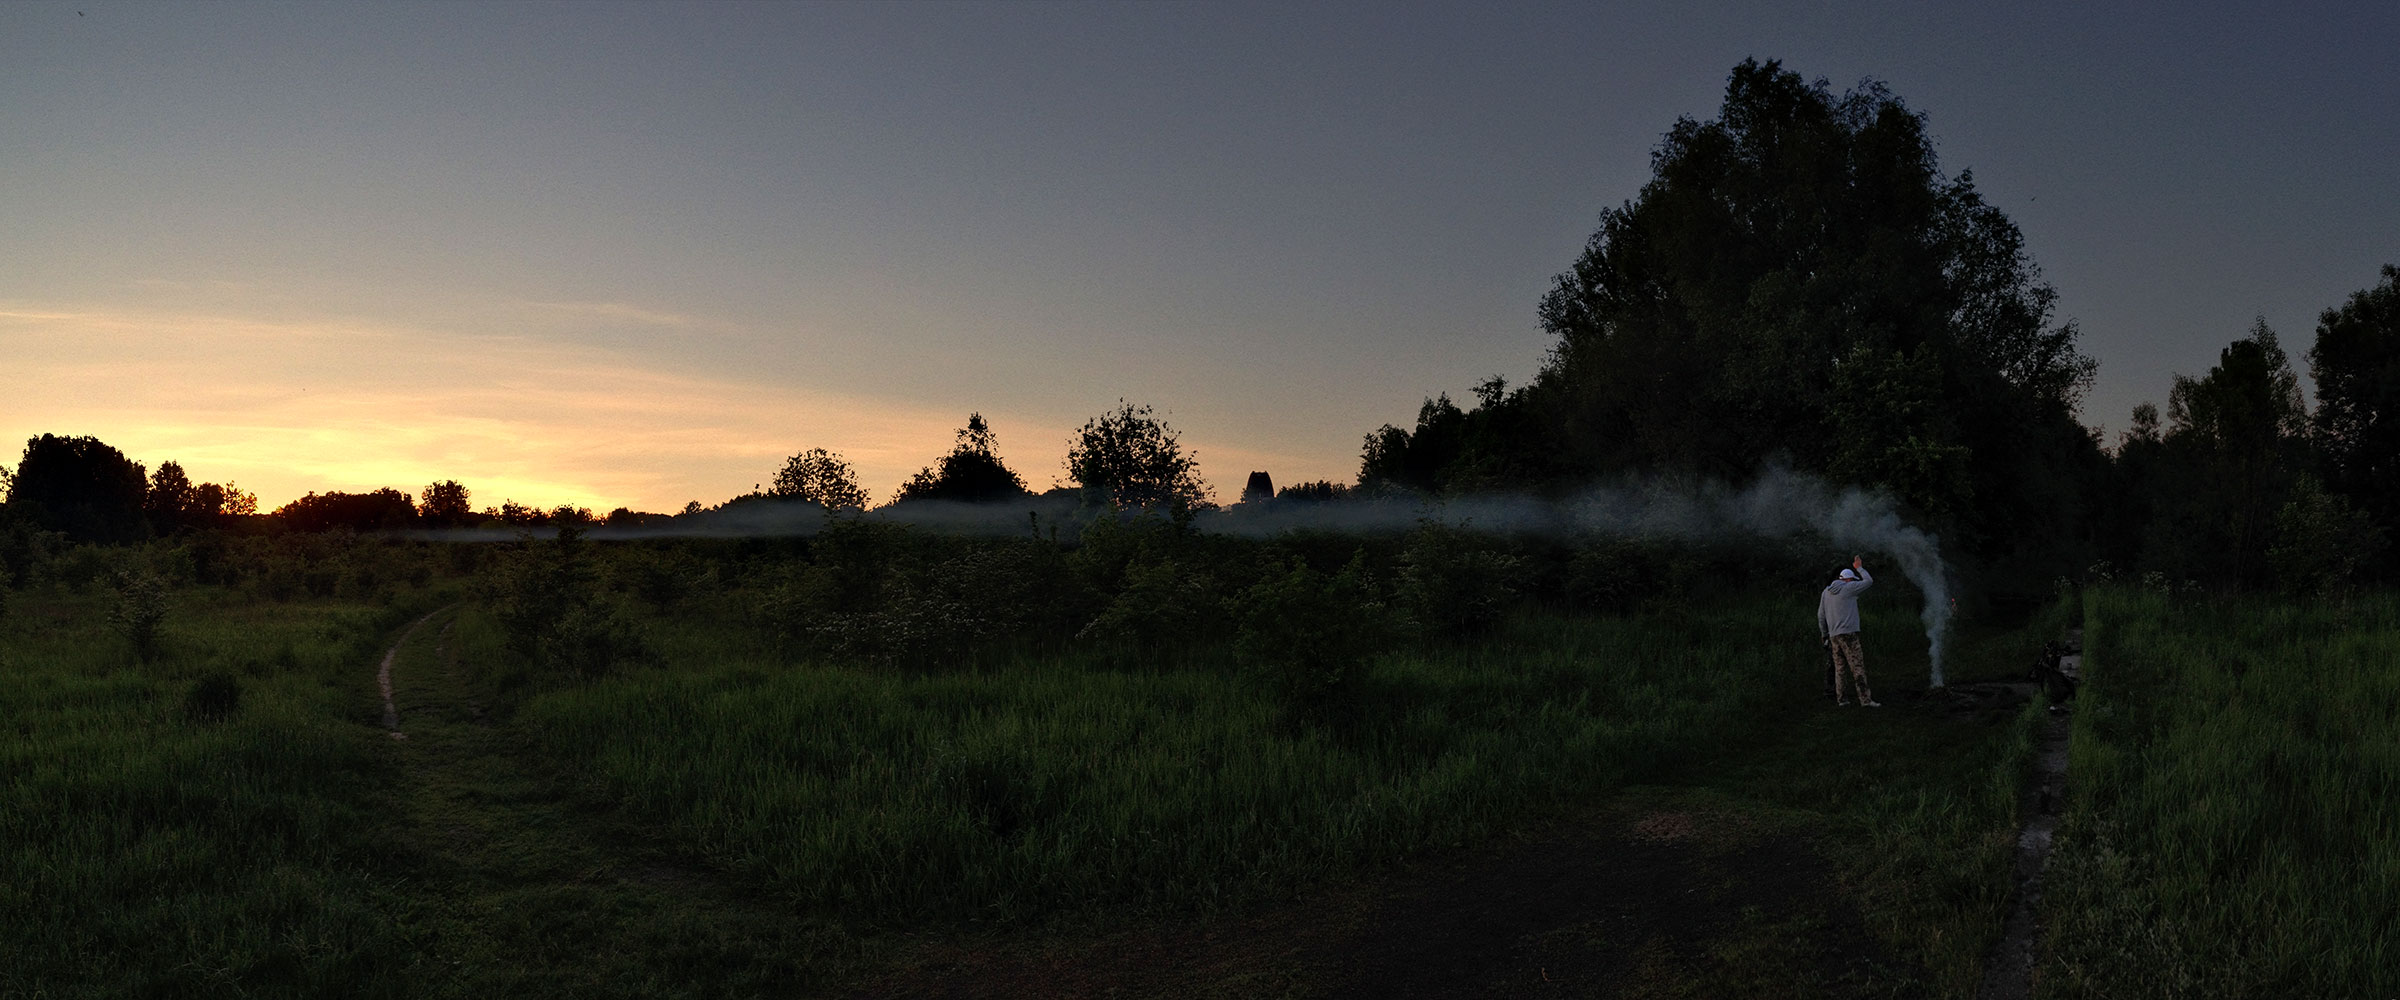 PANORAMA DIARY | Iphoneography blog | Seeding the mist